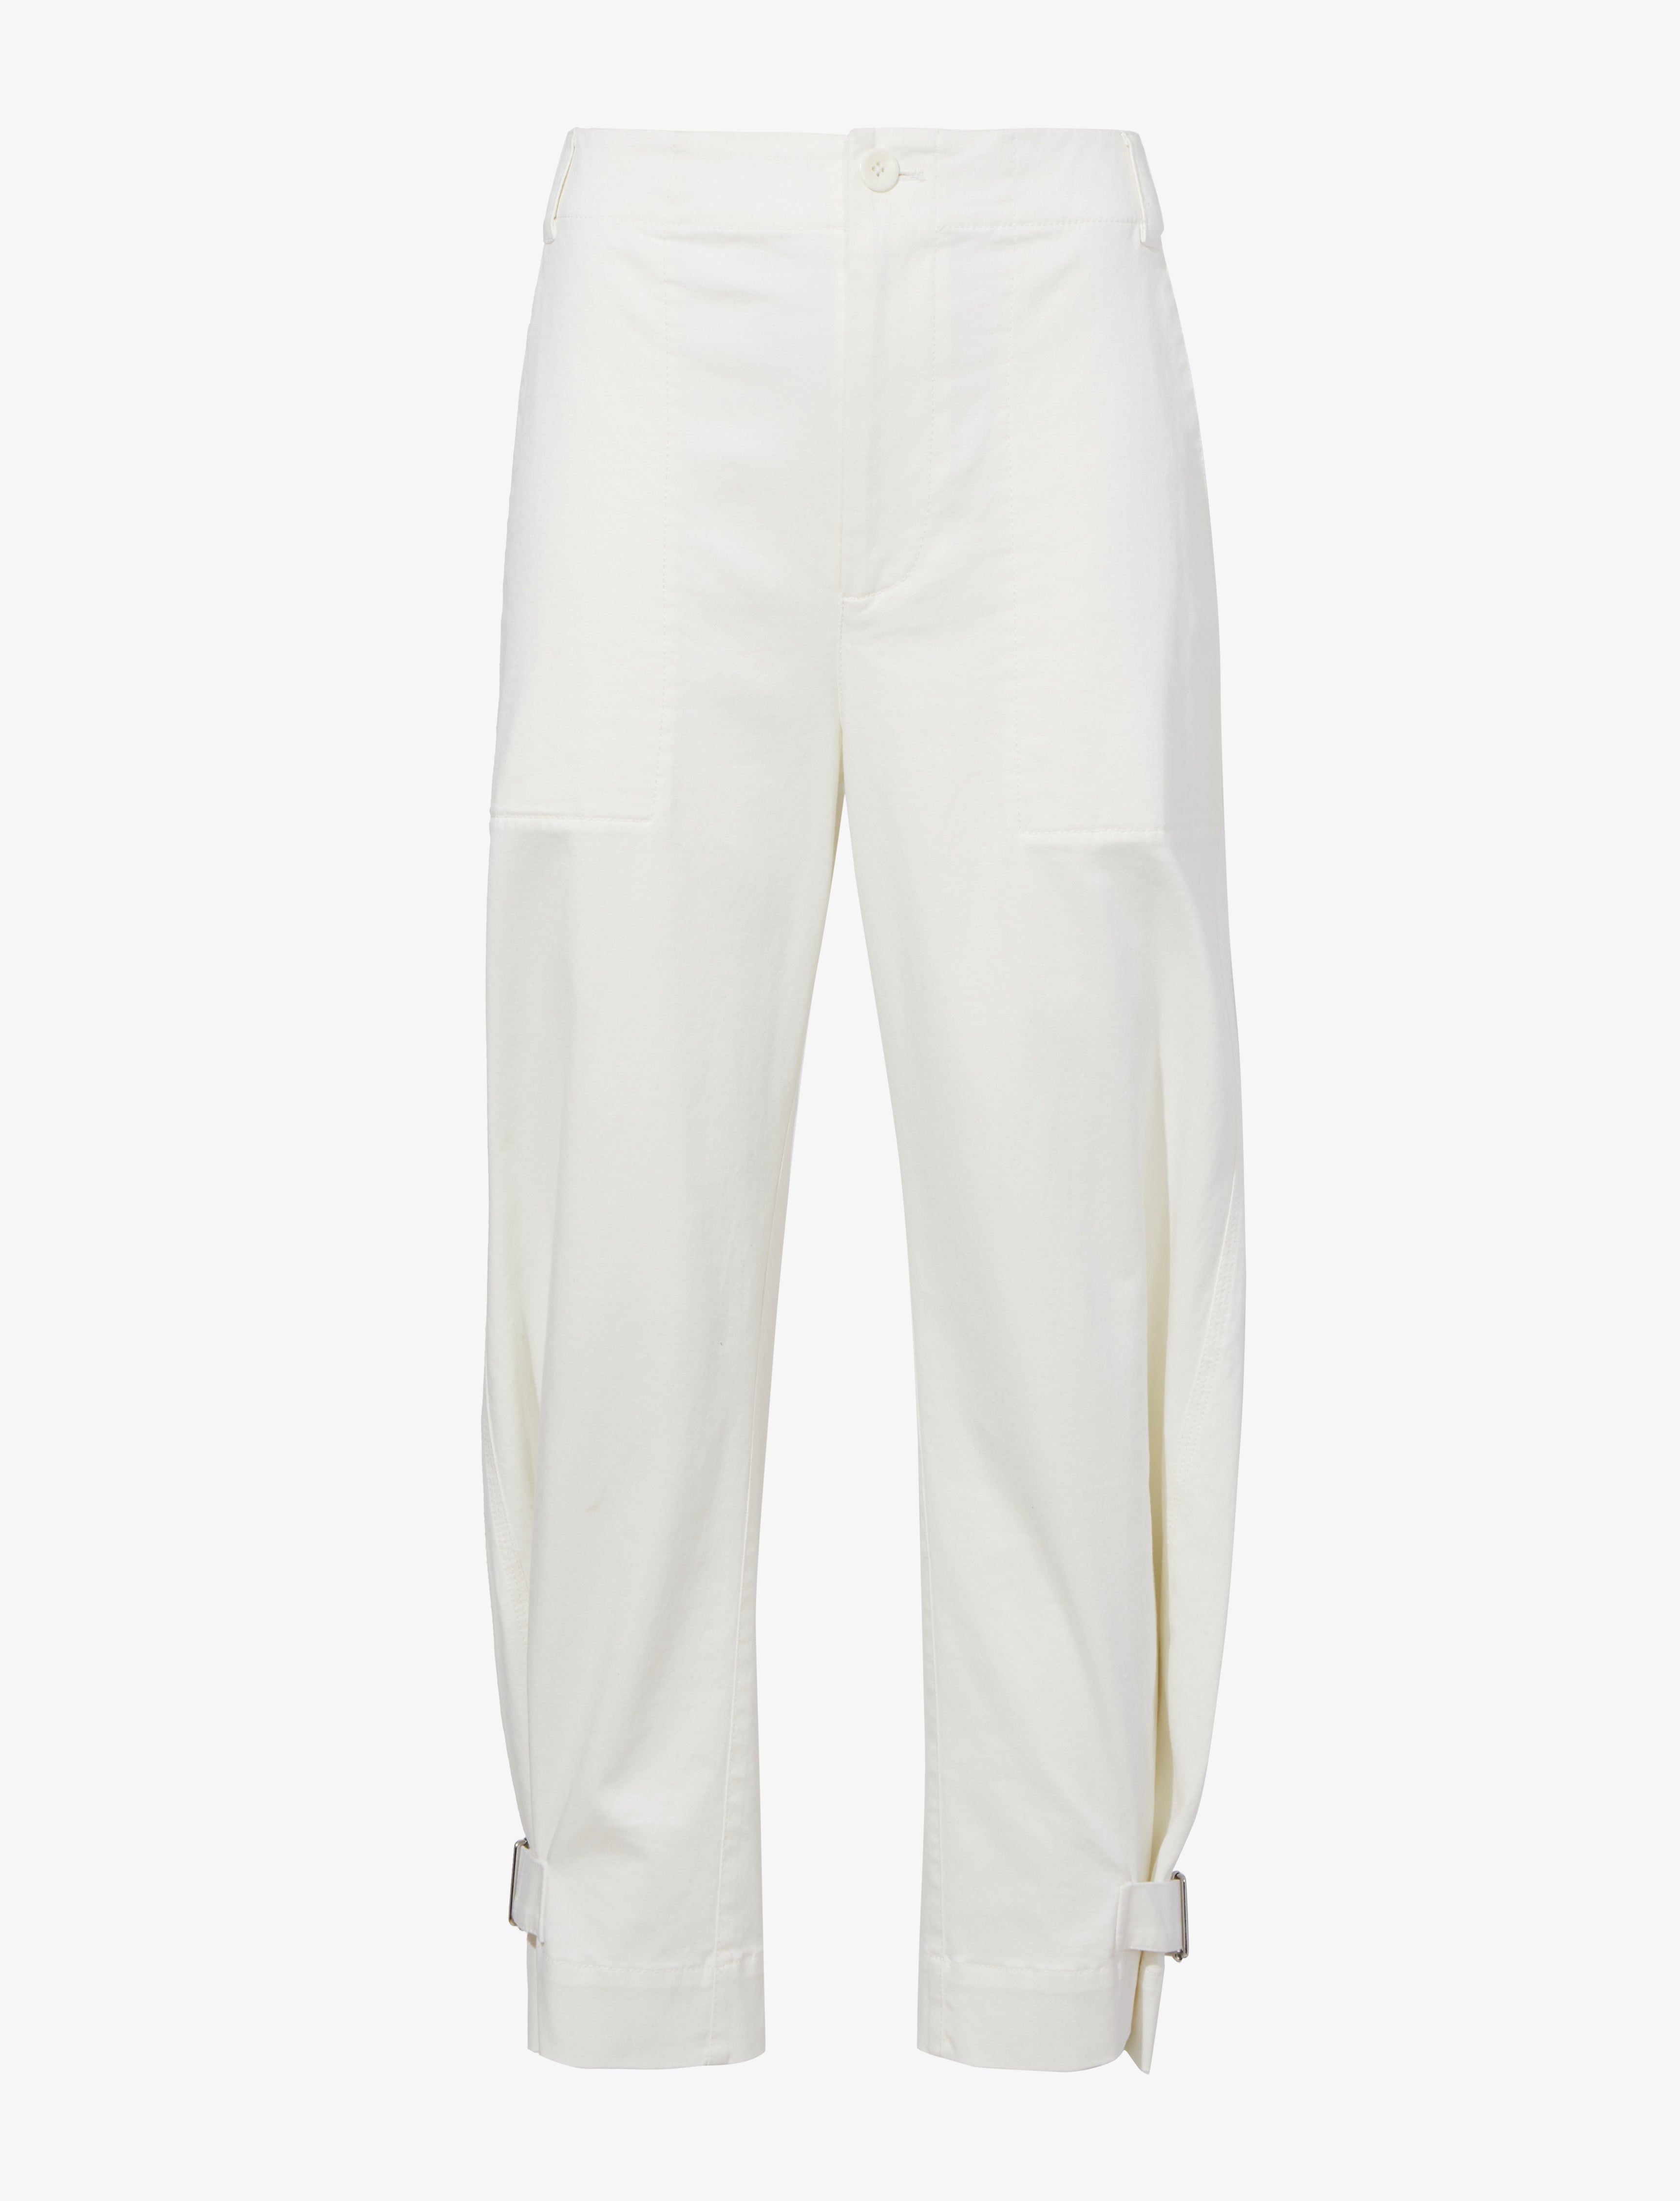 Proenza Schouler White Label Kay Pant in Cotton Twill - Off White ...